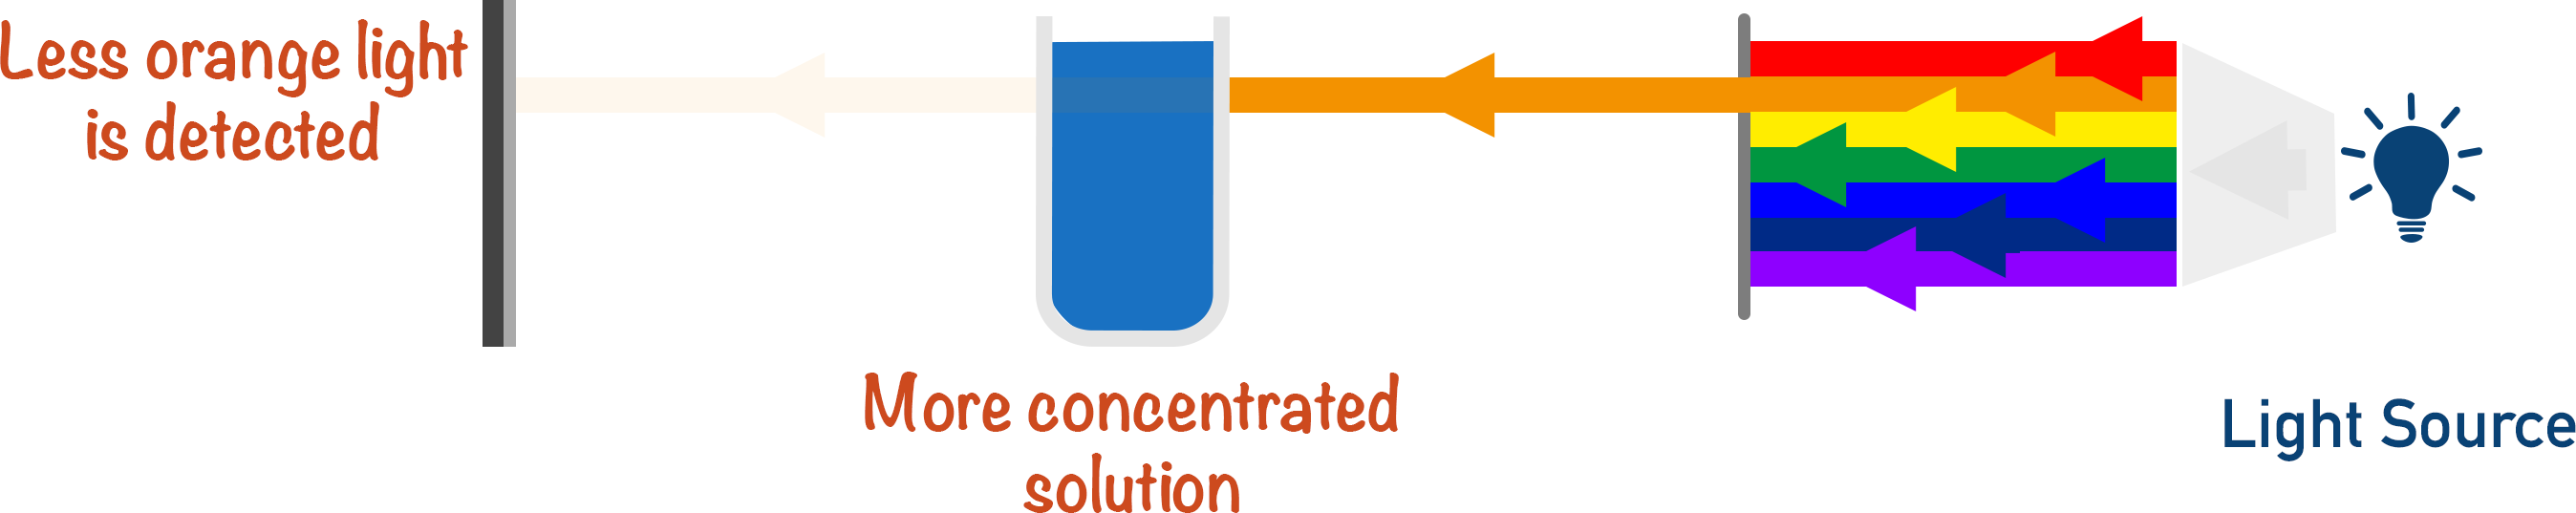 colorimetry concentrated solution